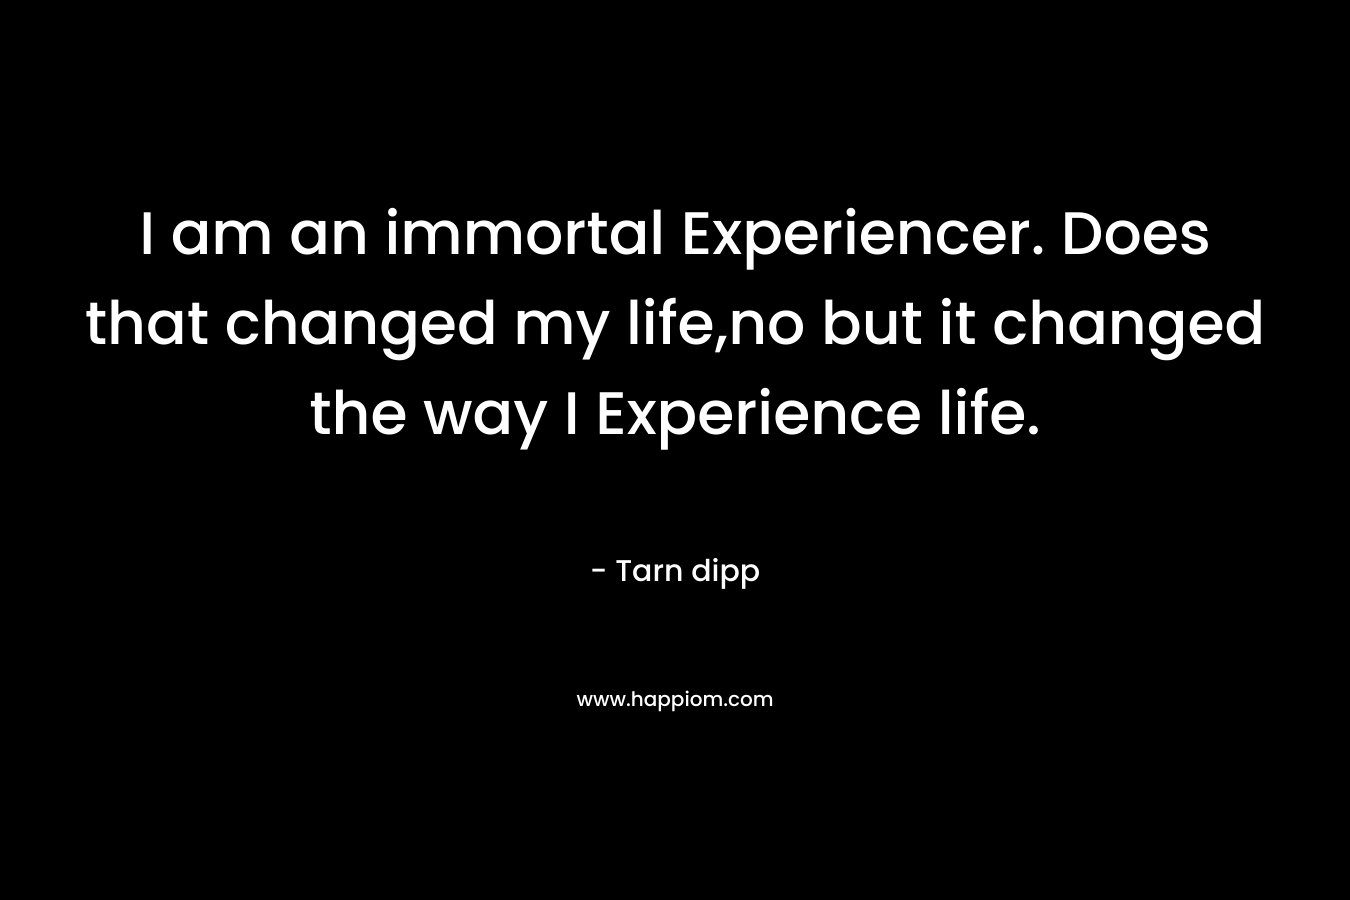 I am an immortal Experiencer. Does that changed my life,no but it changed the way I Experience life. – Tarn dipp